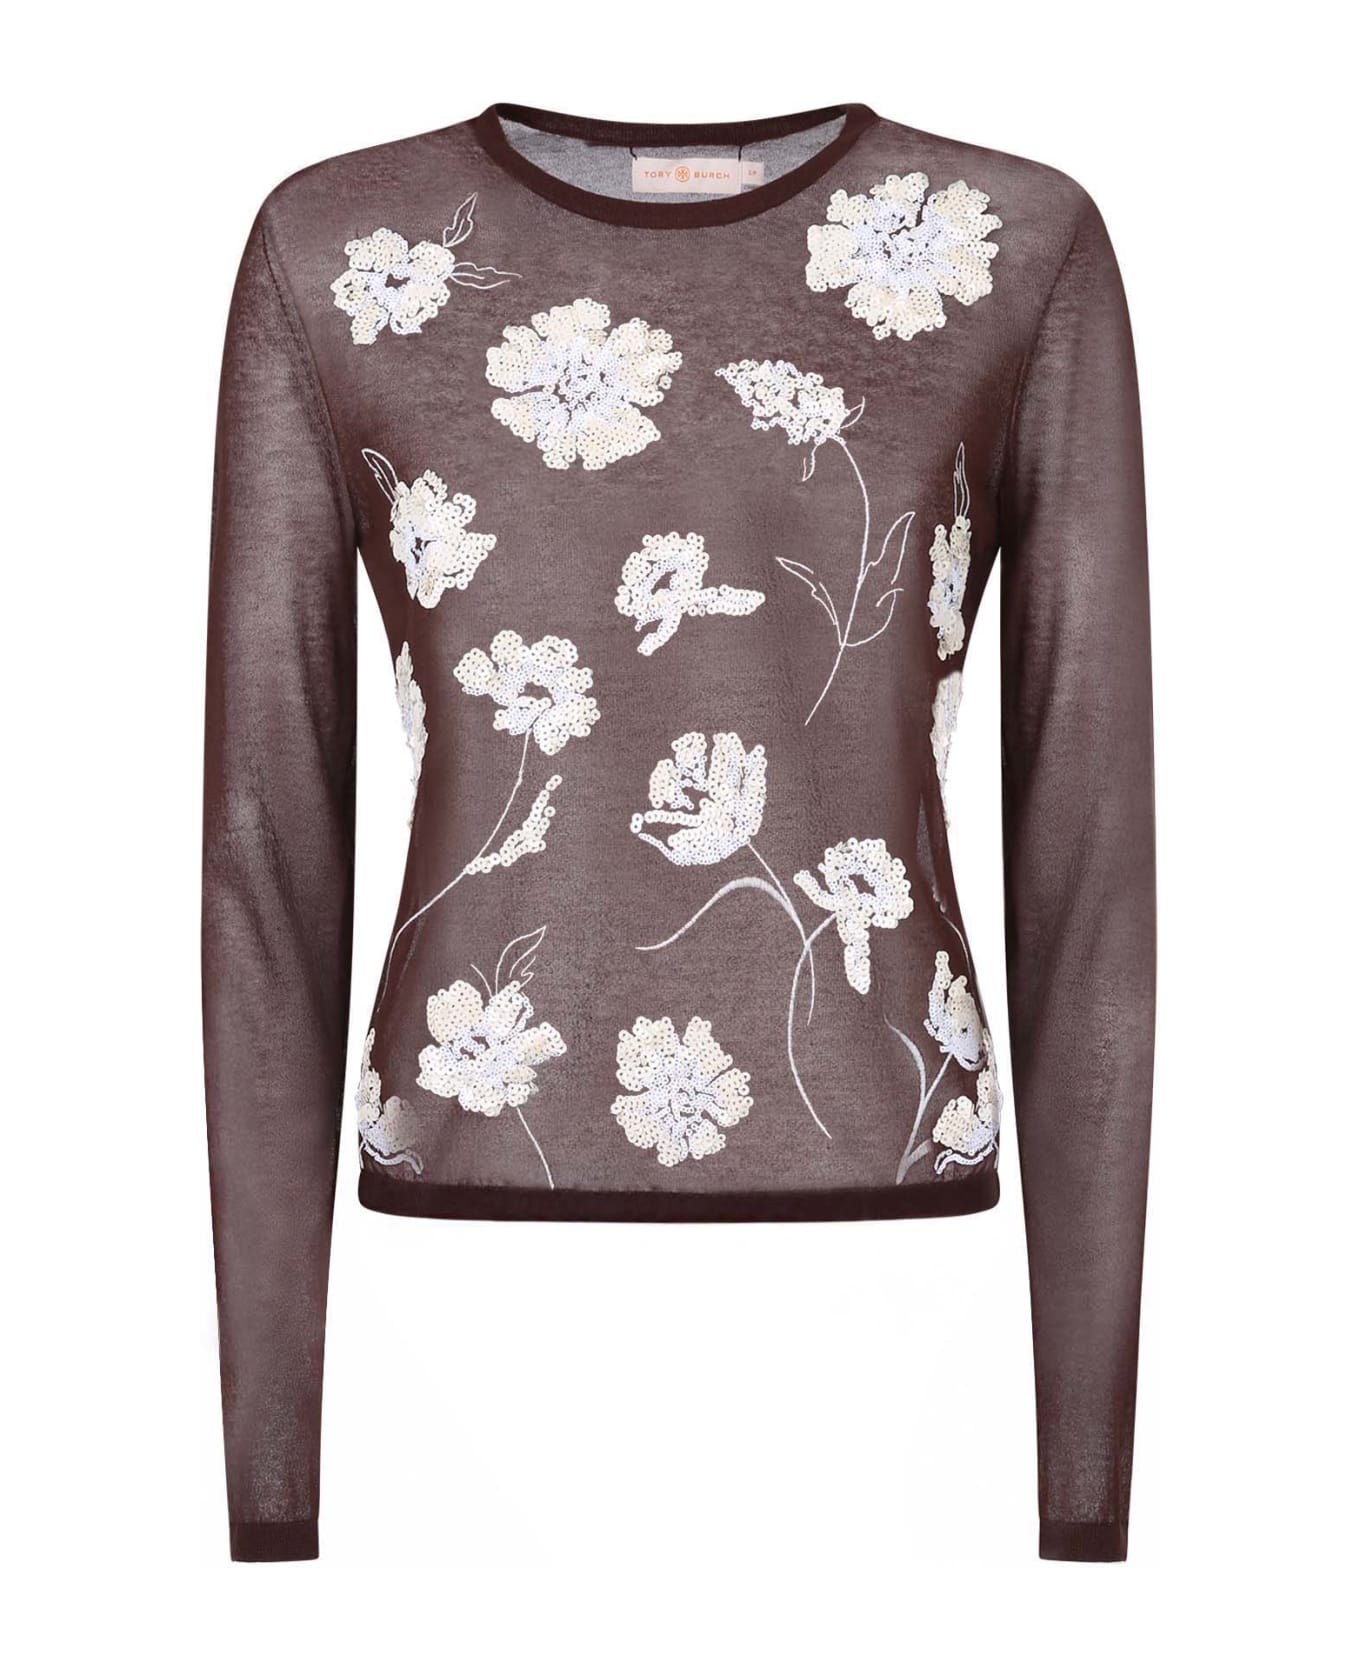 Tory Burch Embellished Sweater - Brown